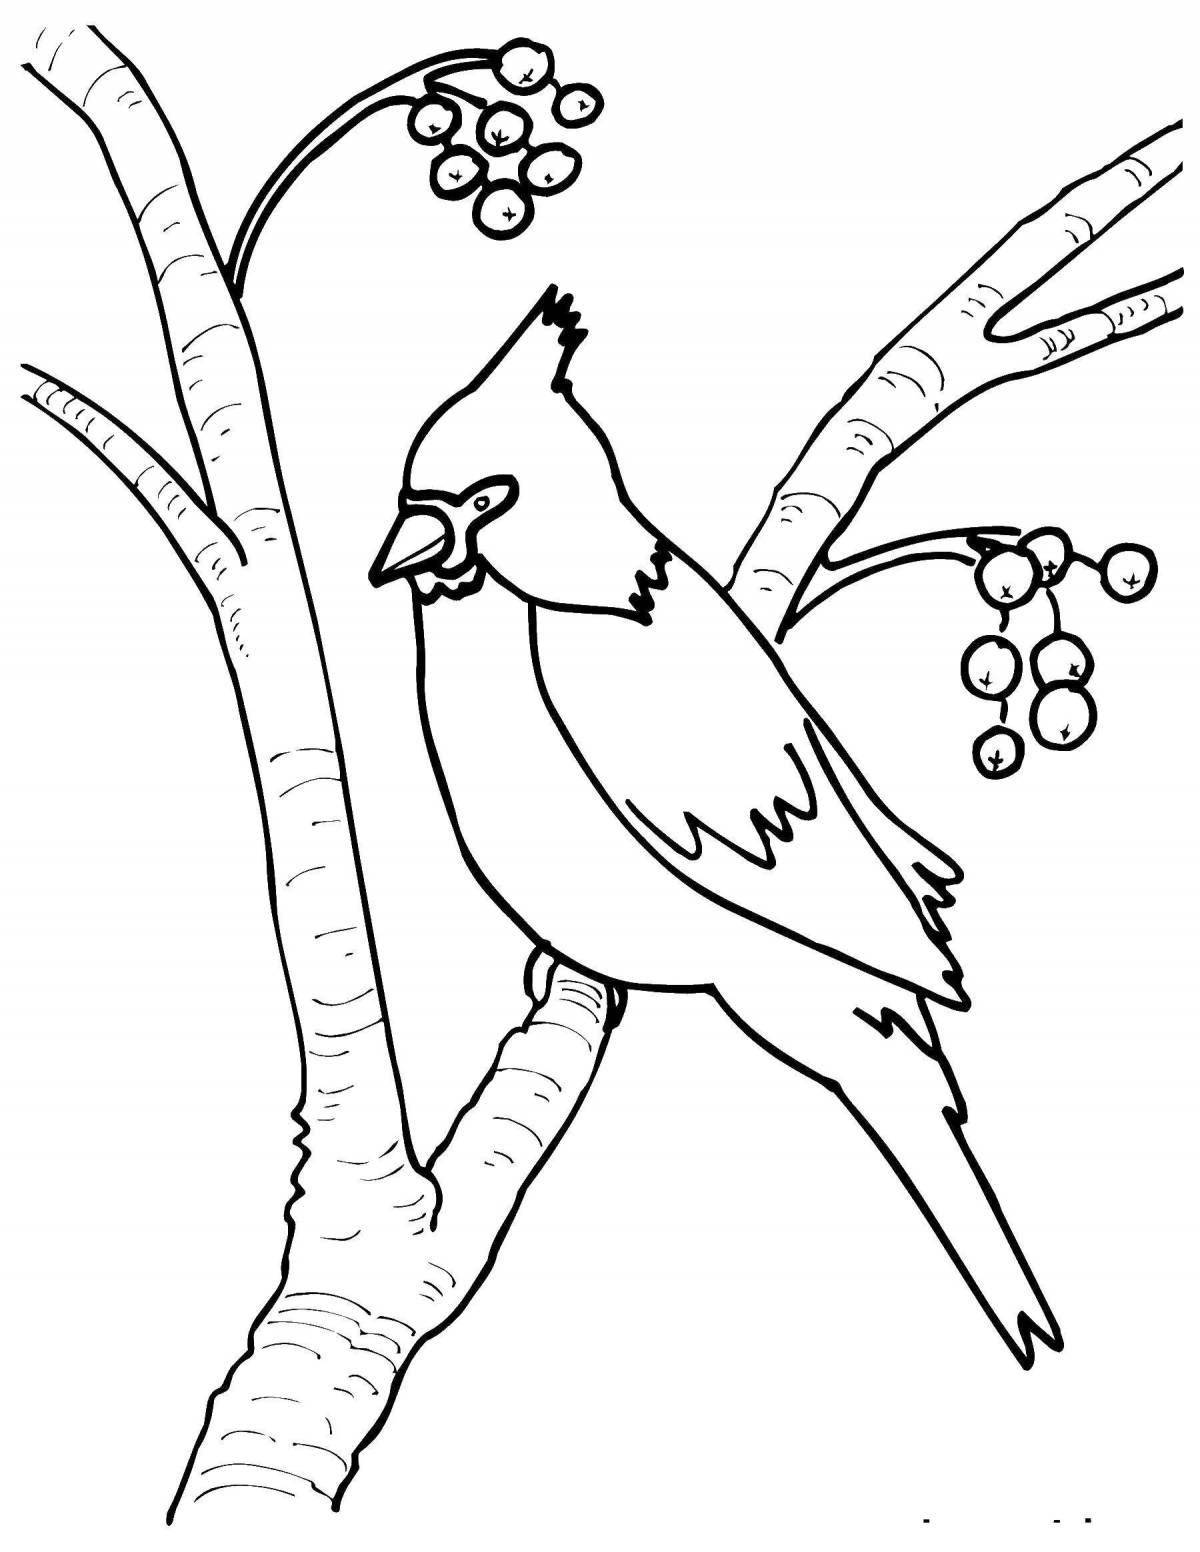 Exquisite waxwing bird coloring page